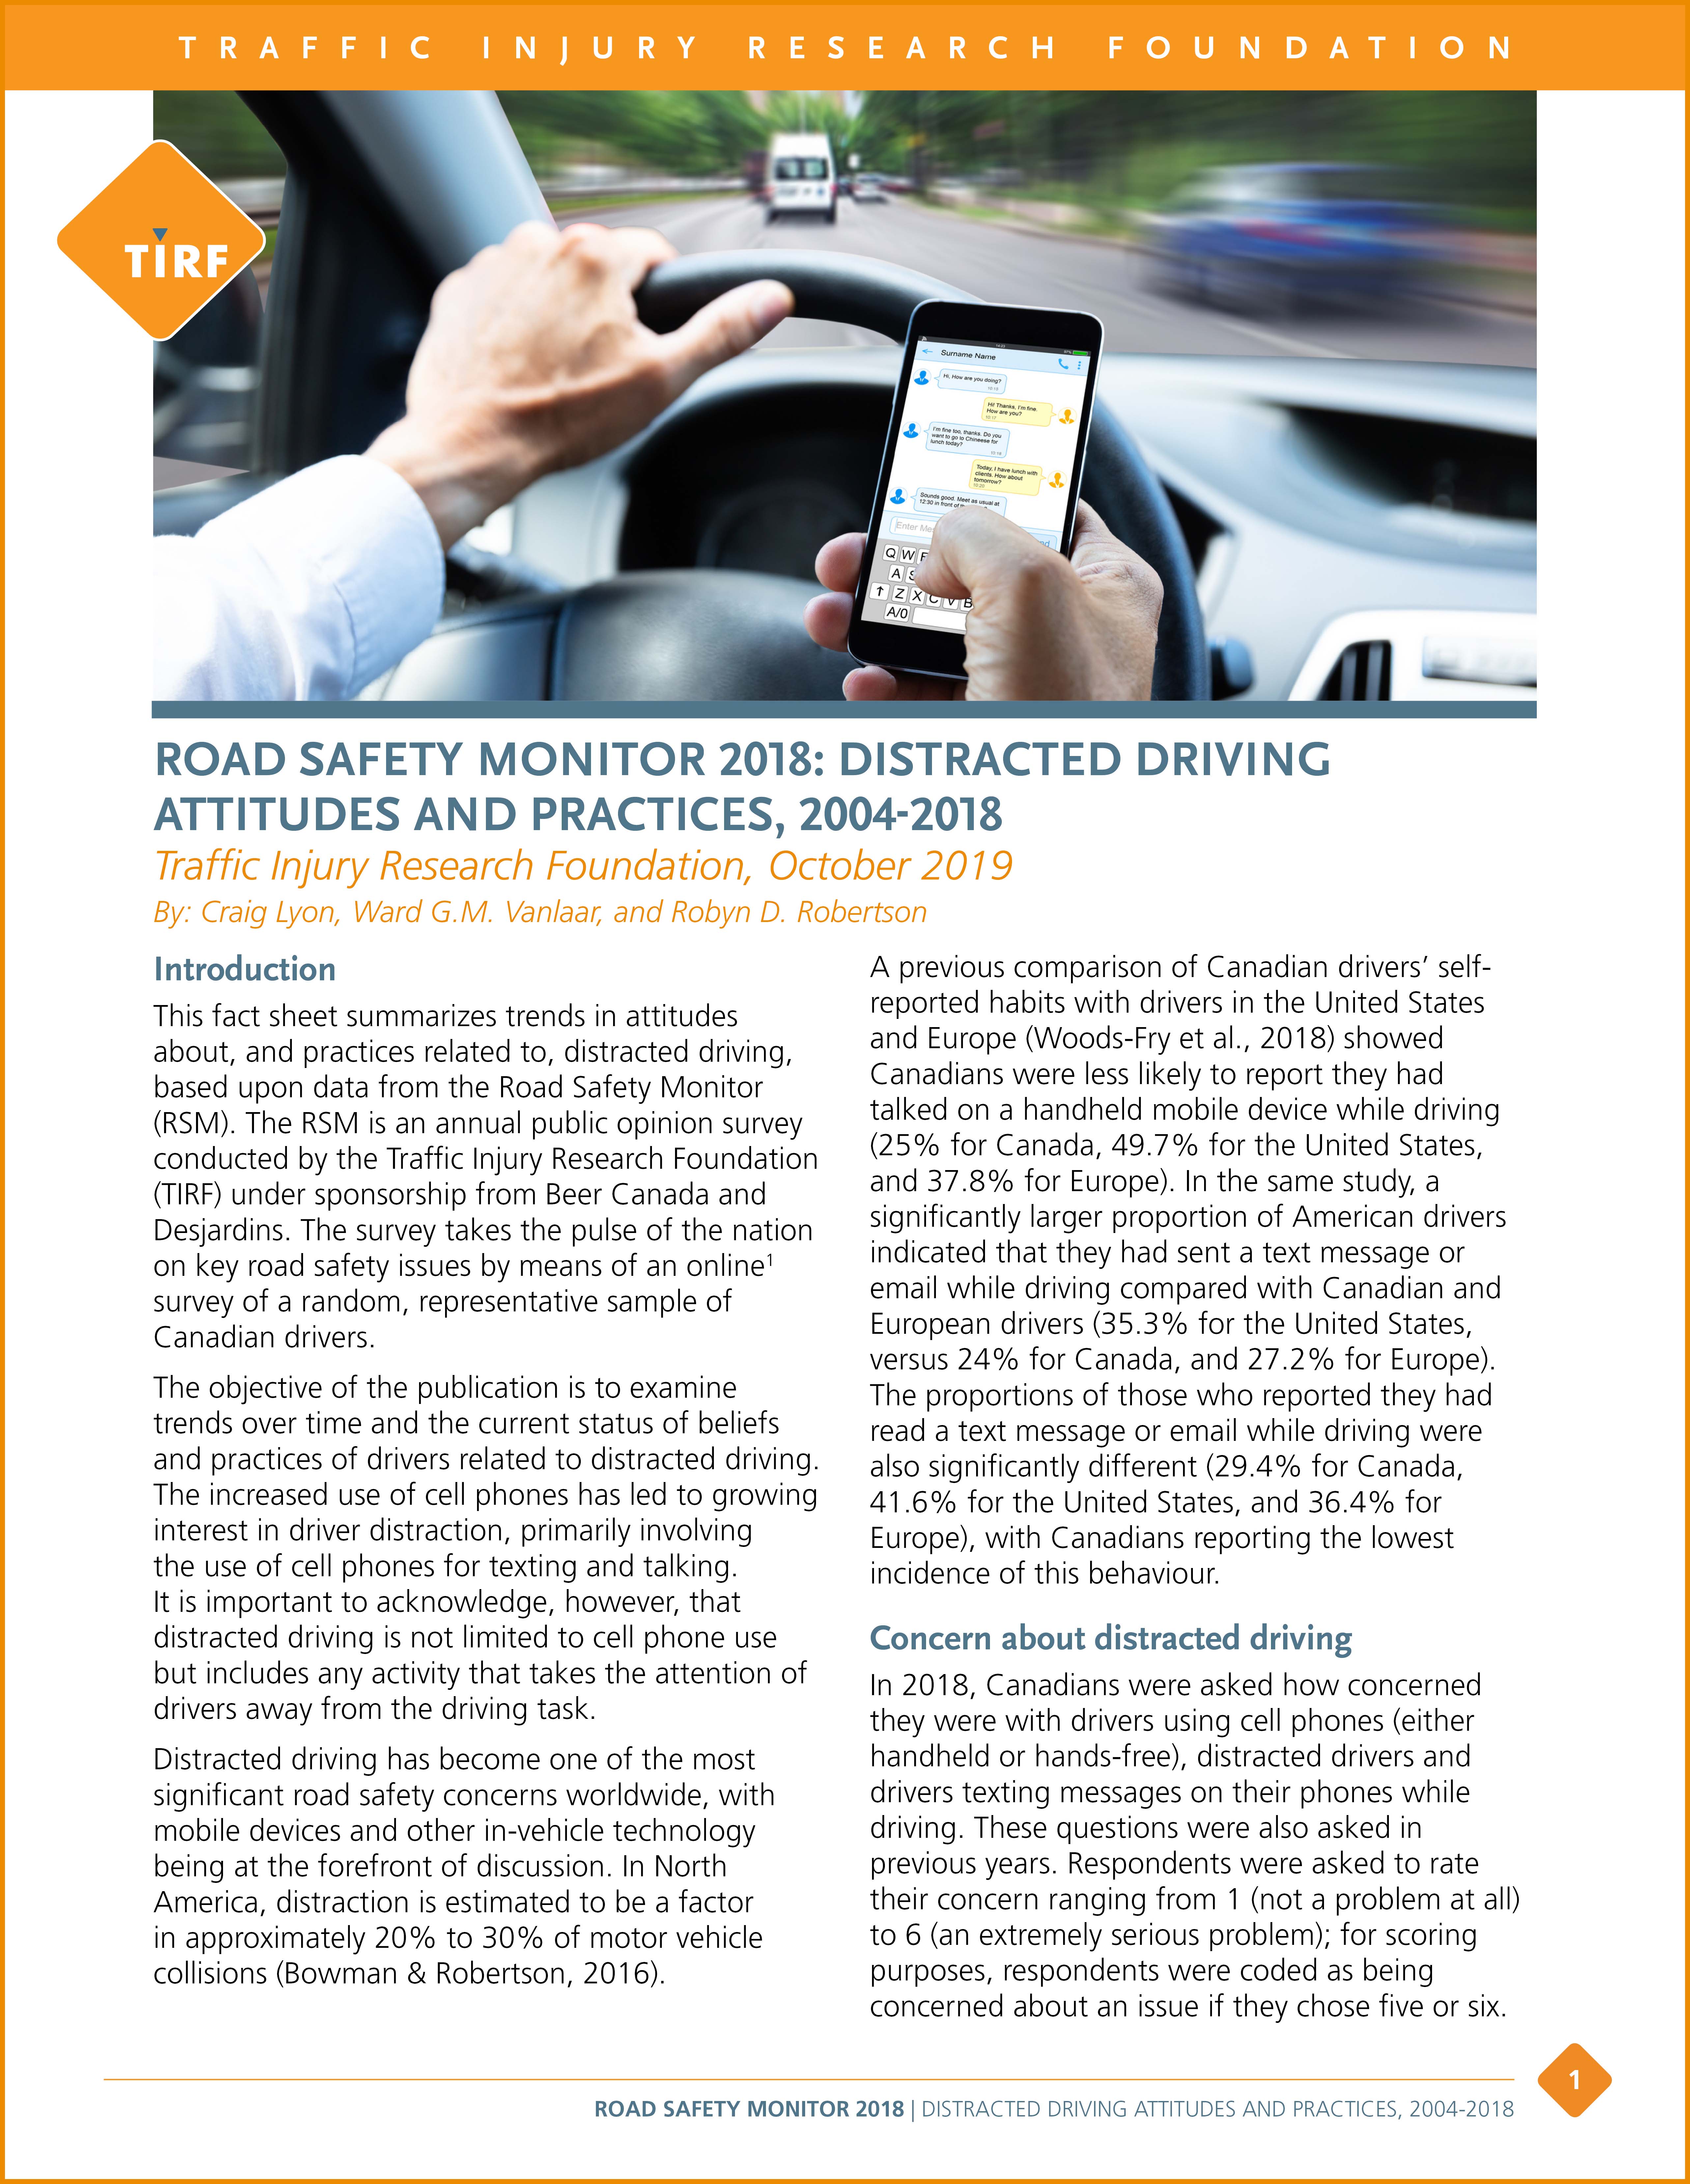 RSM Distracted Driving Attitudes and Practices, 2004-2018-COVER with orange border